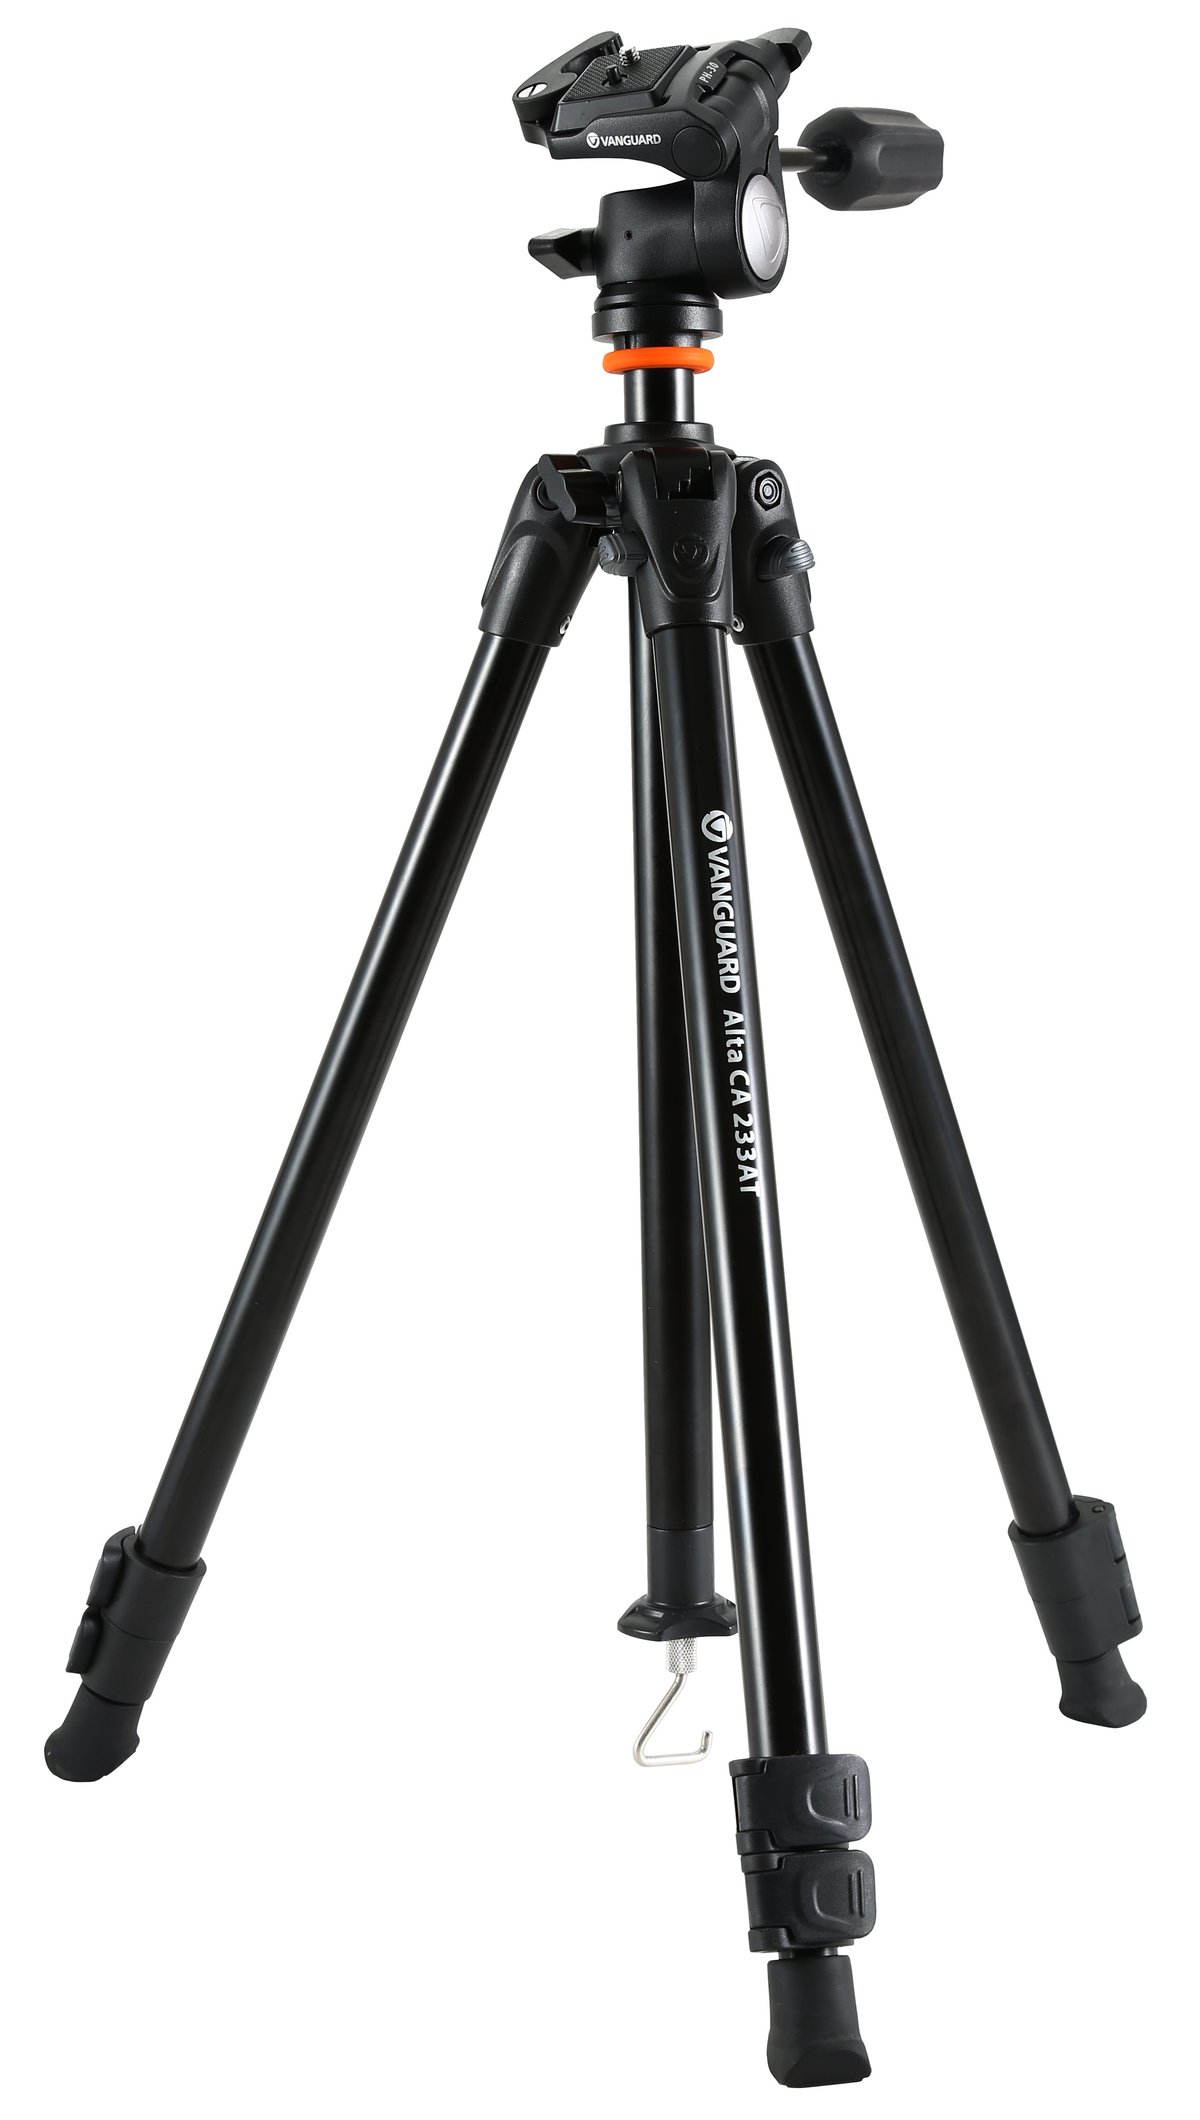 STEAL OF THE WEEK (while supplies last) - ALTA CA 233AO Aluminum Tripod with 3-Way Pan Head - Rated at 13lbs/6kg